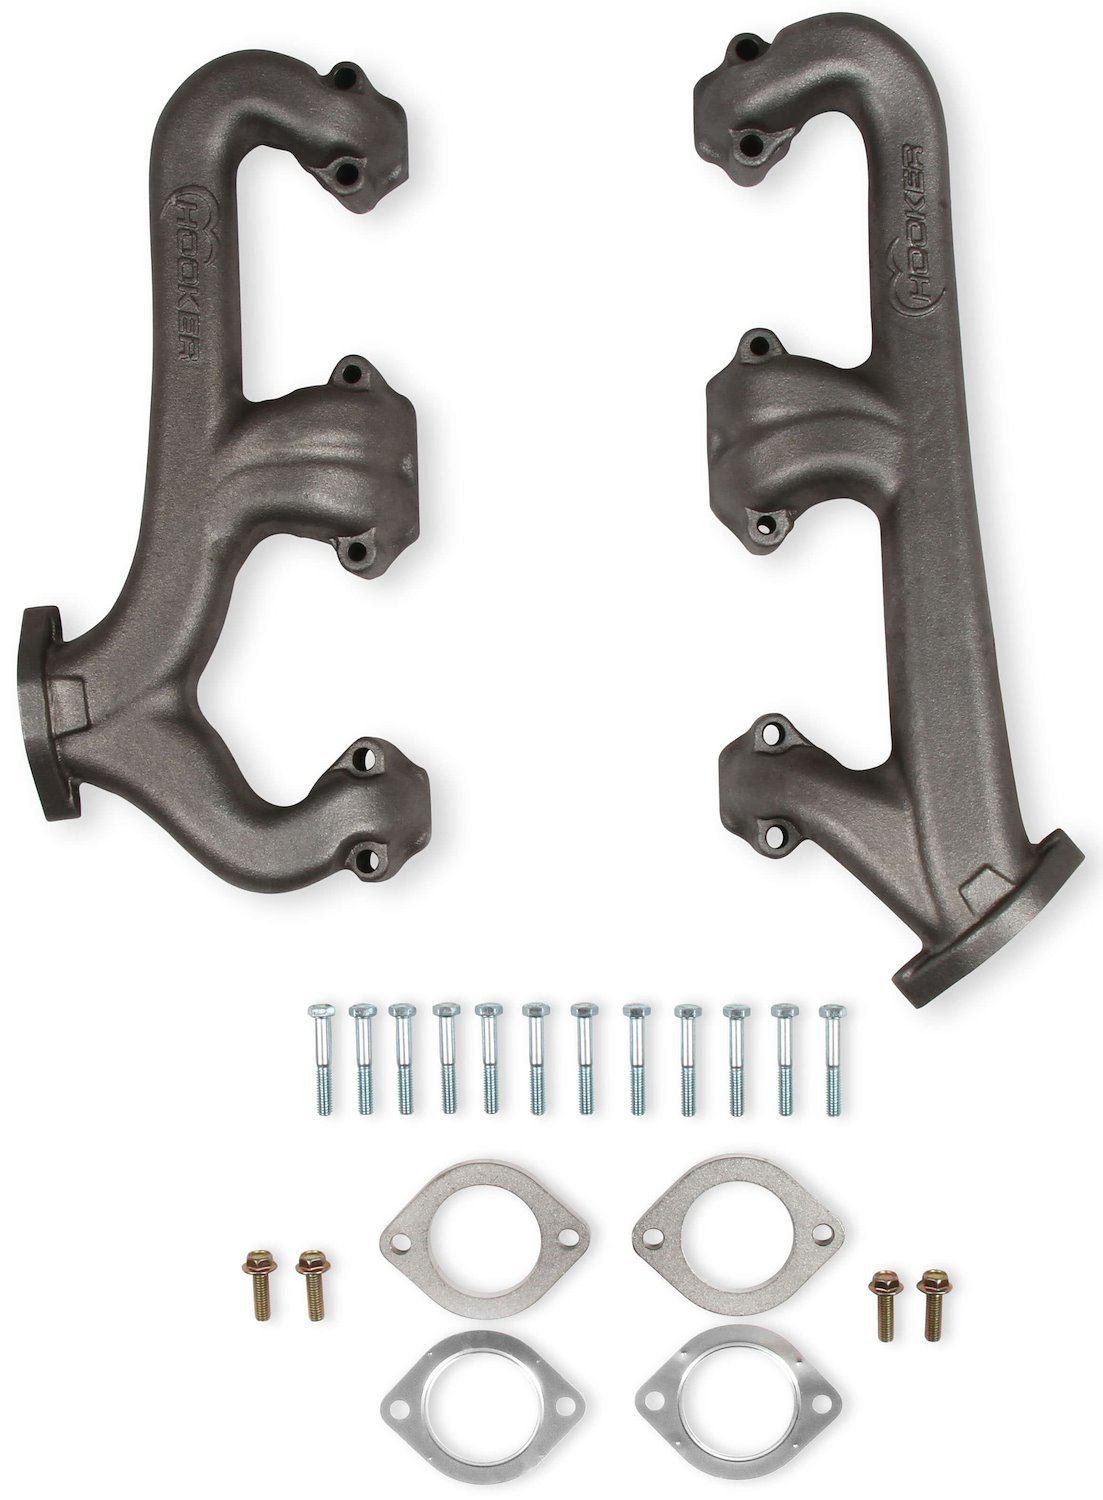 Exhaust Manifolds for Small Block Chevy 262-400 V8